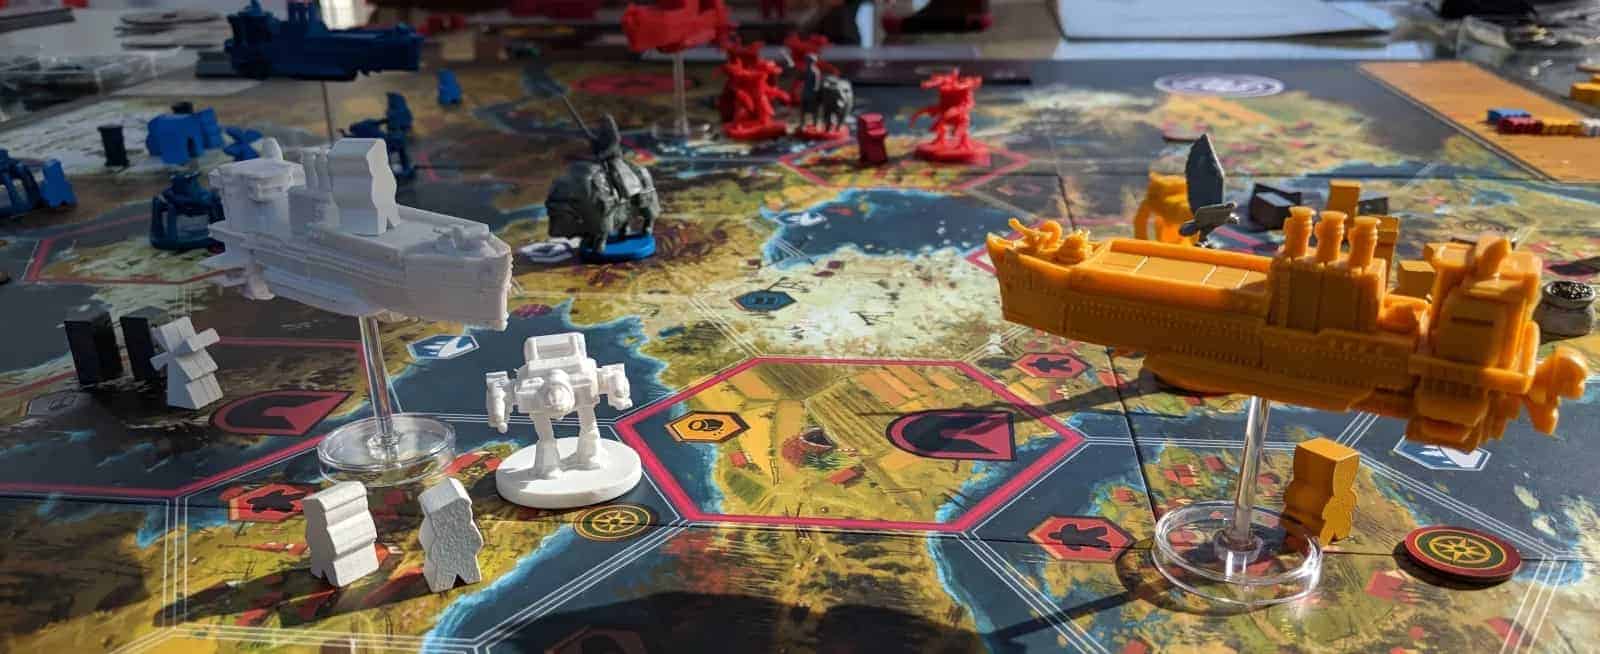 The close to perfect implementation of the Steampunk universe make Scythe one of the best solitaire area control board games we have played to date.